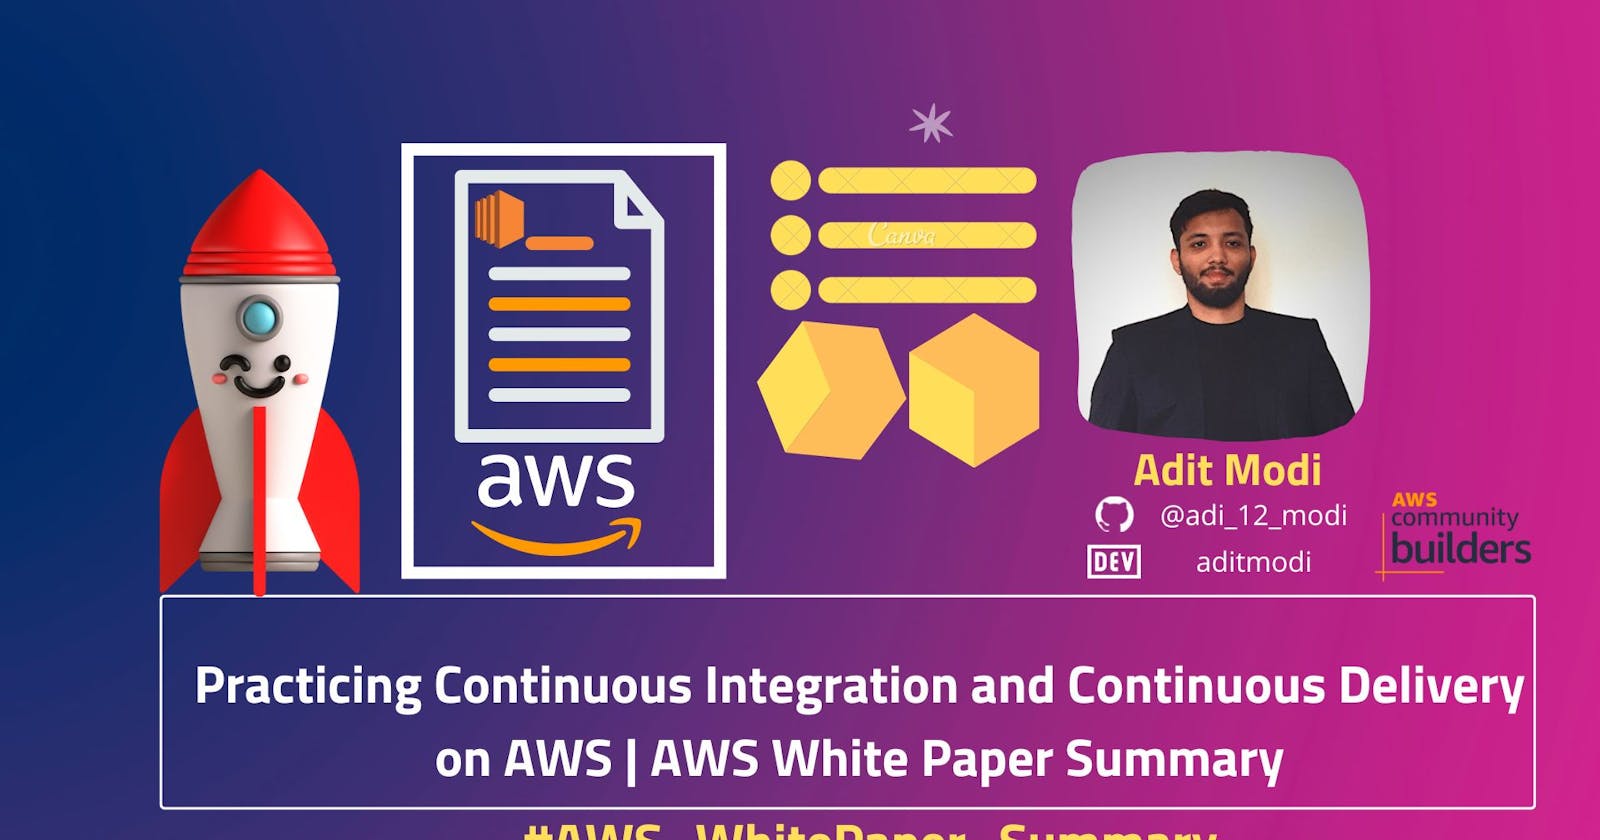 Practicing Continuous Integration and Continuous Delivery on AWS | AWS White Paper Summary